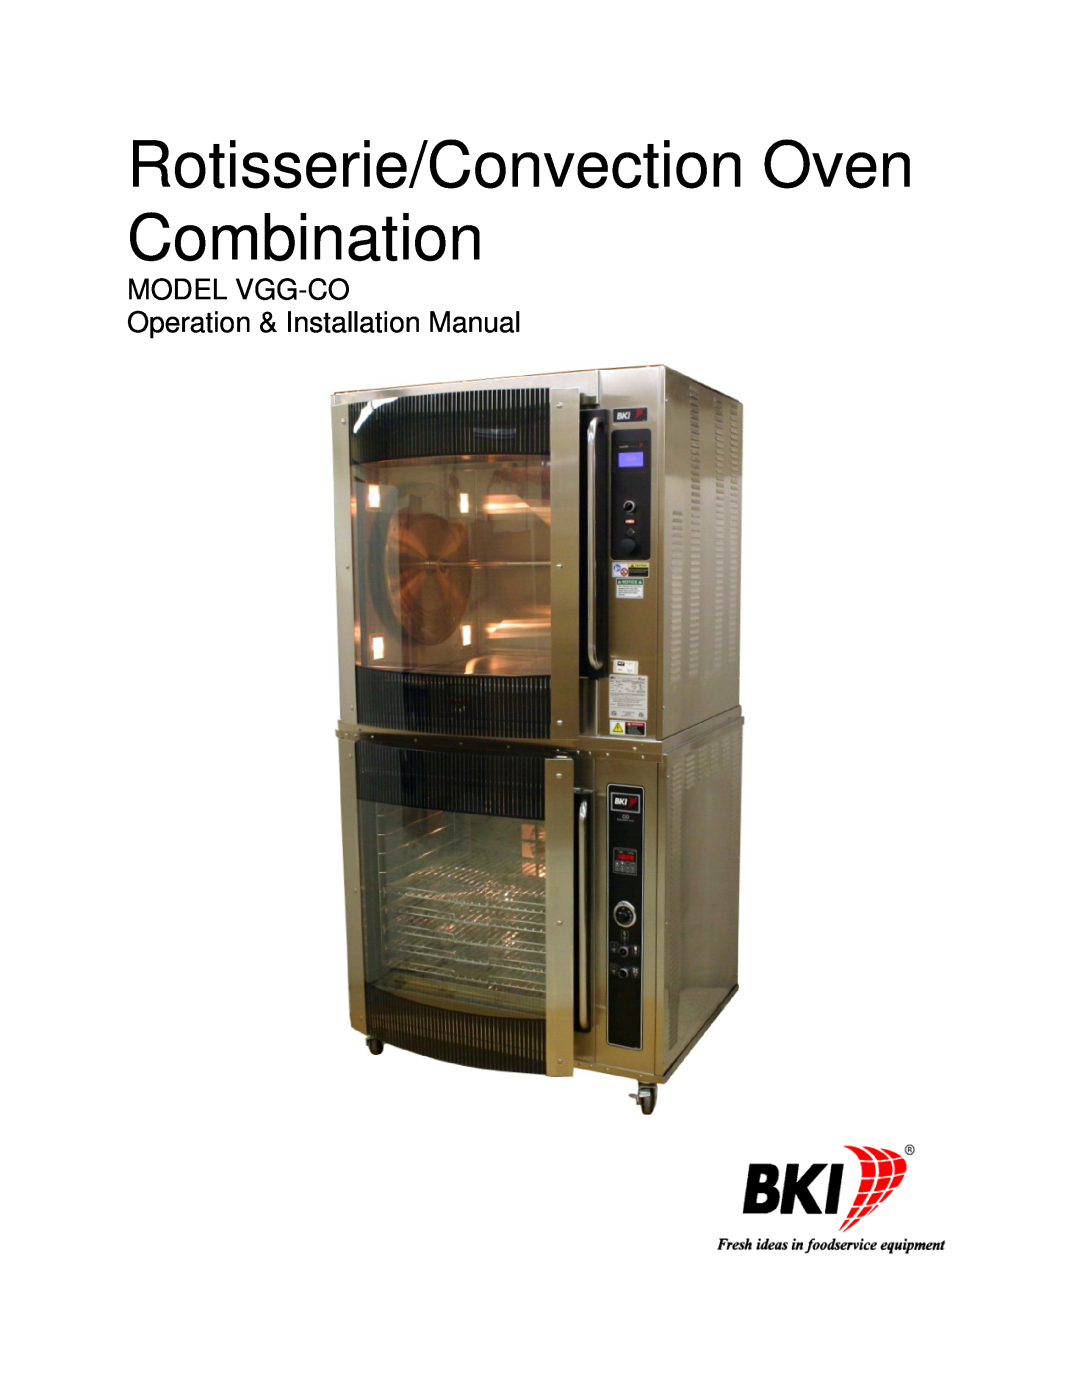 Bakers Pride Oven VGG-CO installation manual Rotisserie/Convection Oven Combination 